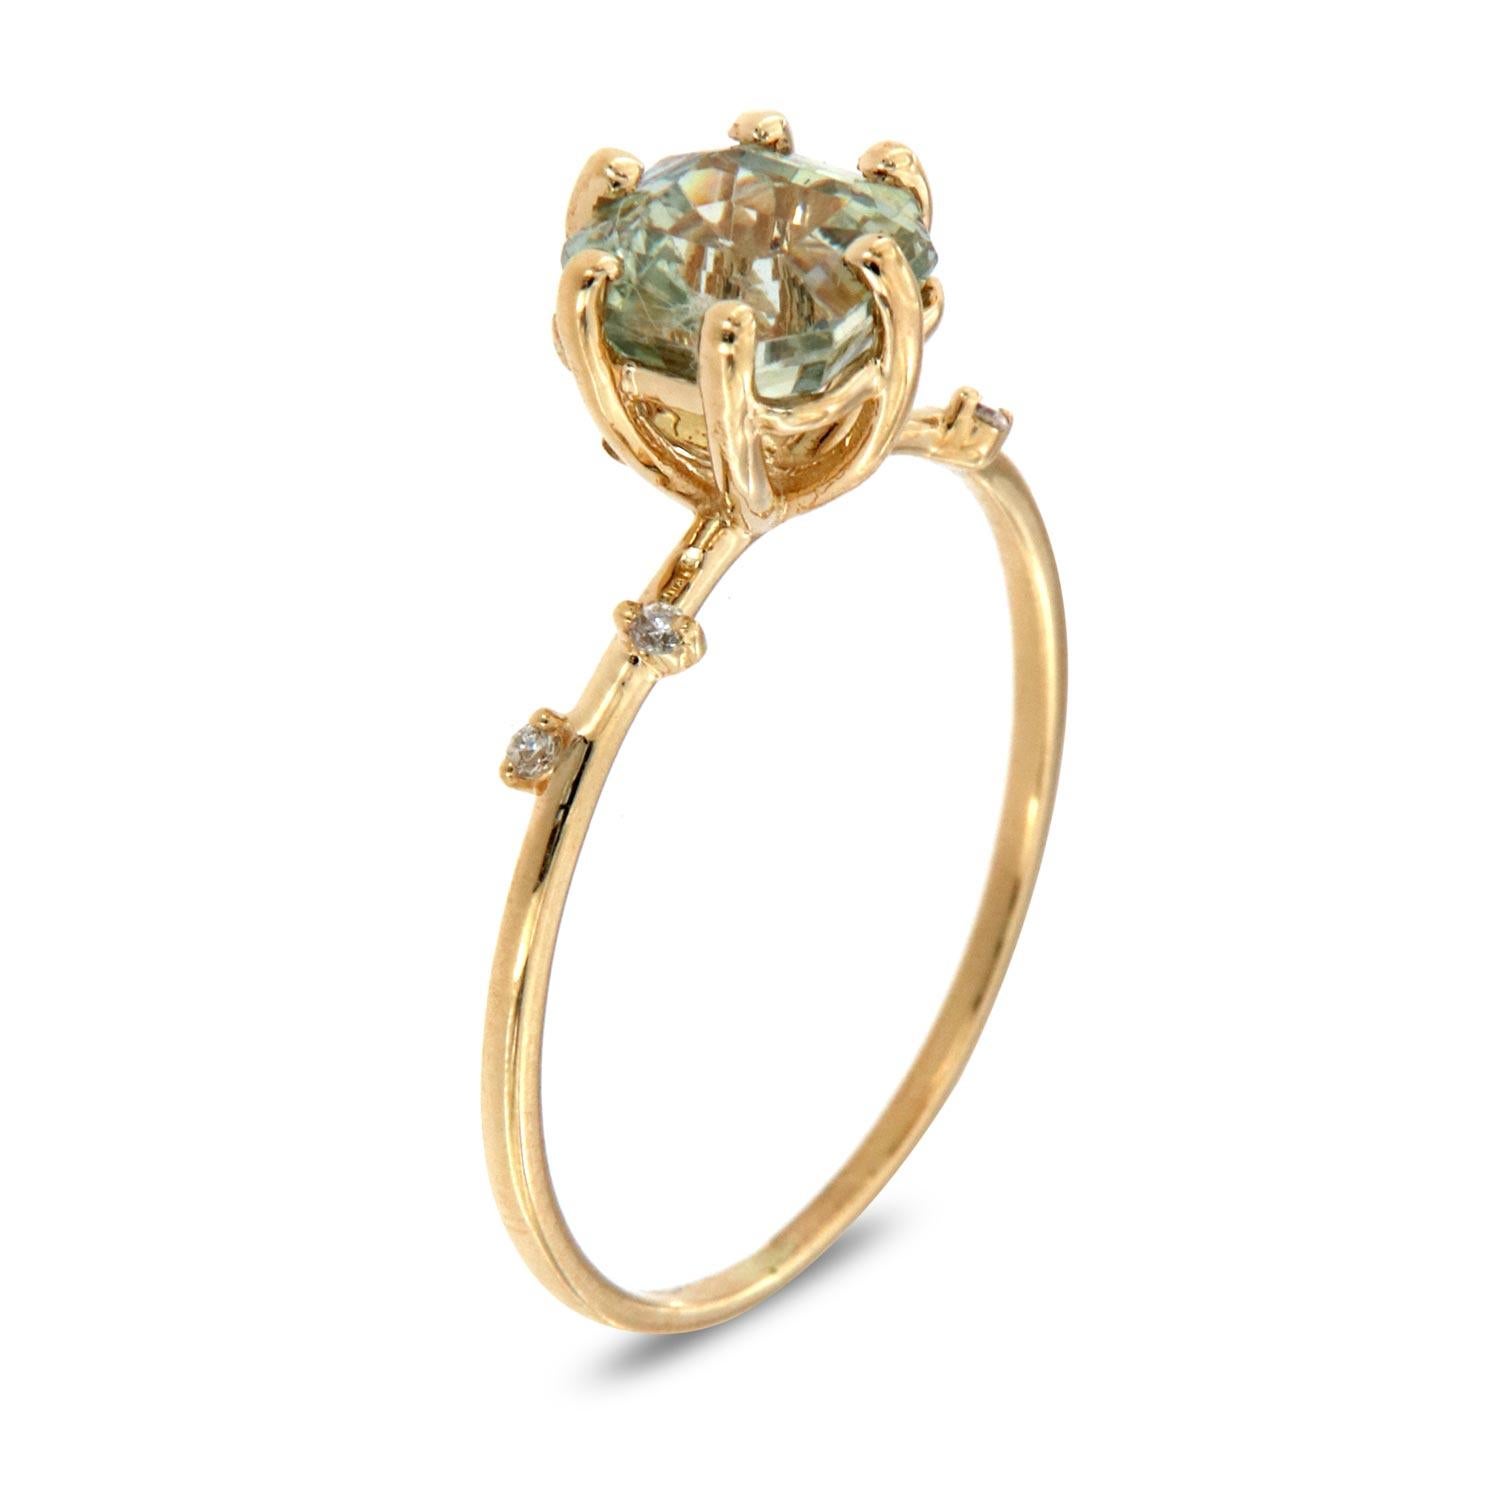 This petite fashion ring is impressive in its vintage appeal, featuring a natural white emerald shape sapphire, accented with scattered round brilliant diamonds. Experience the difference in person!

Product details: 

Center Gemstone Type: